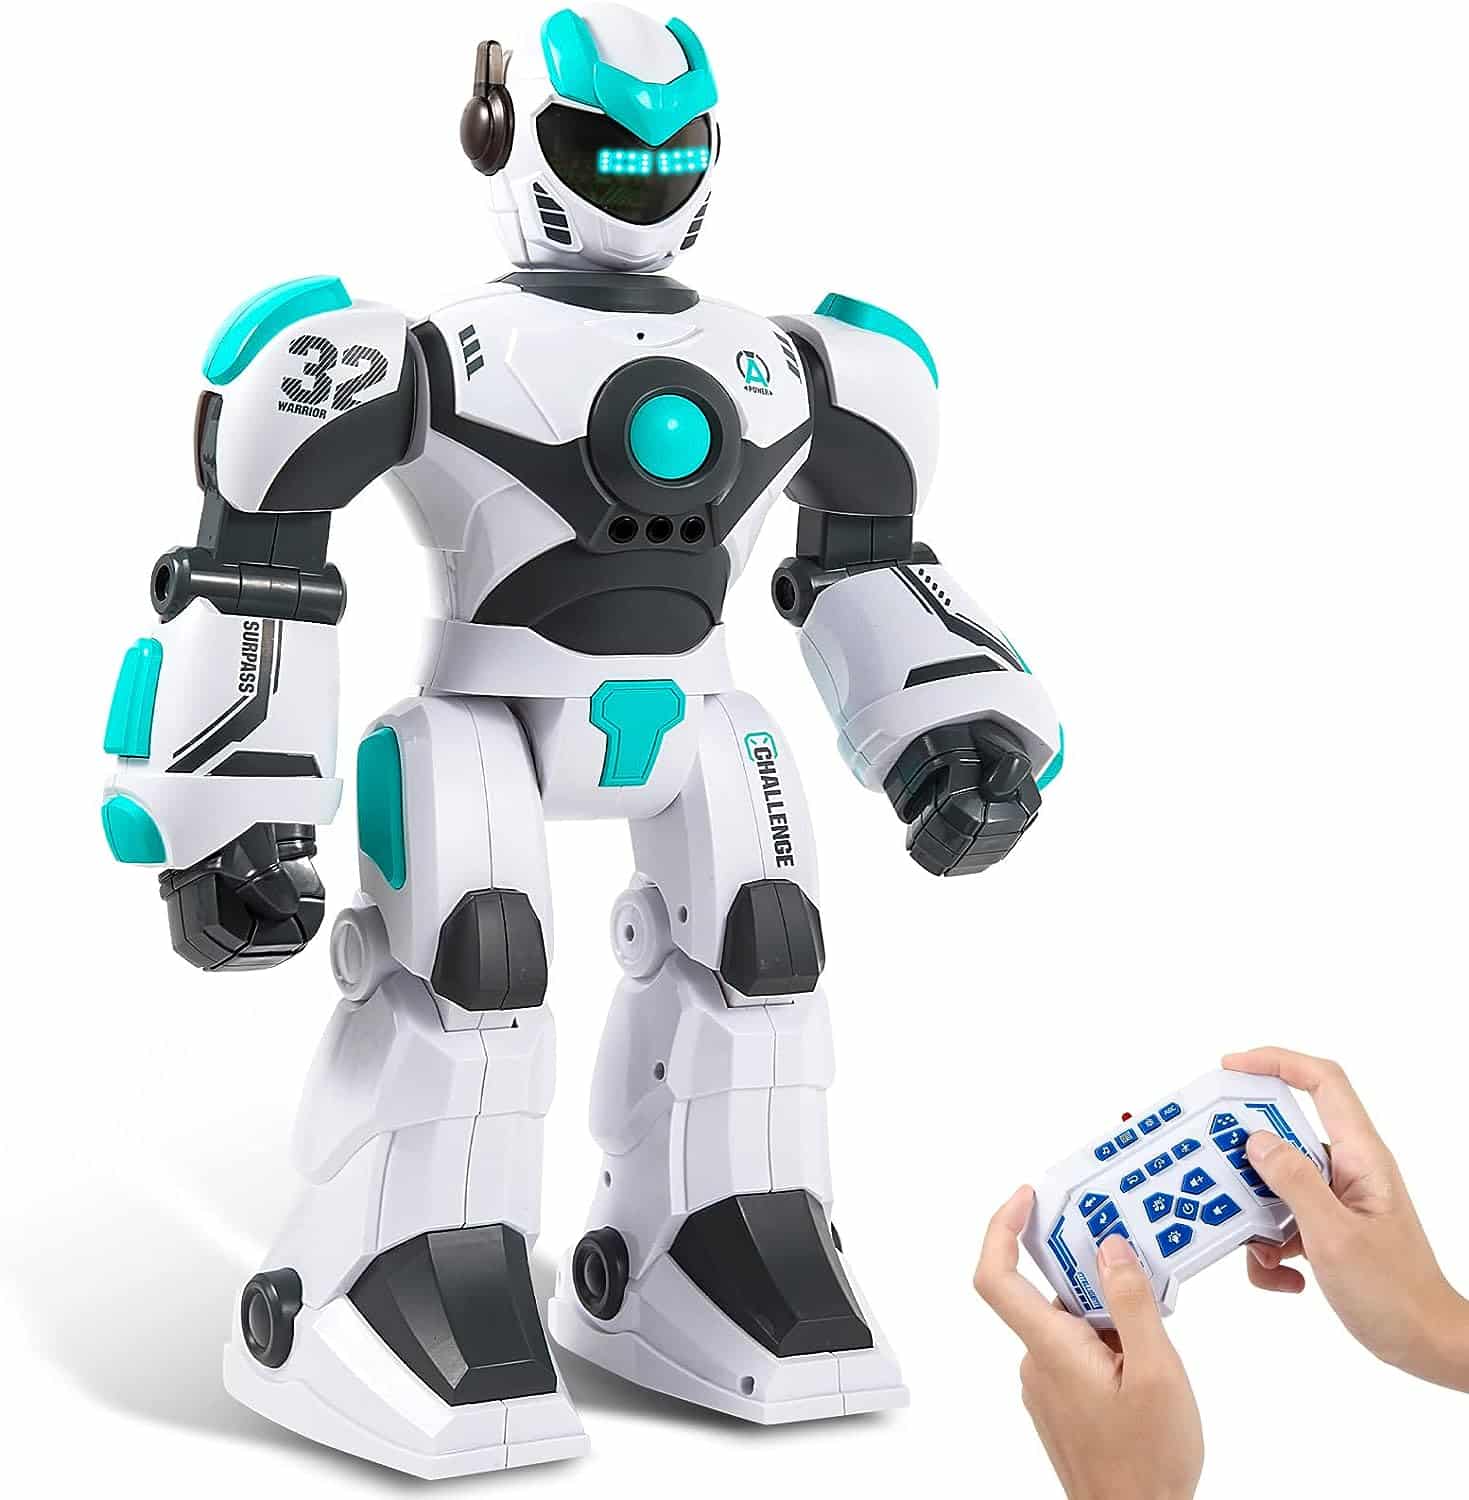 HPROMOT RC Robot Toy Review: The Perfect Gift for Kids of All Ages